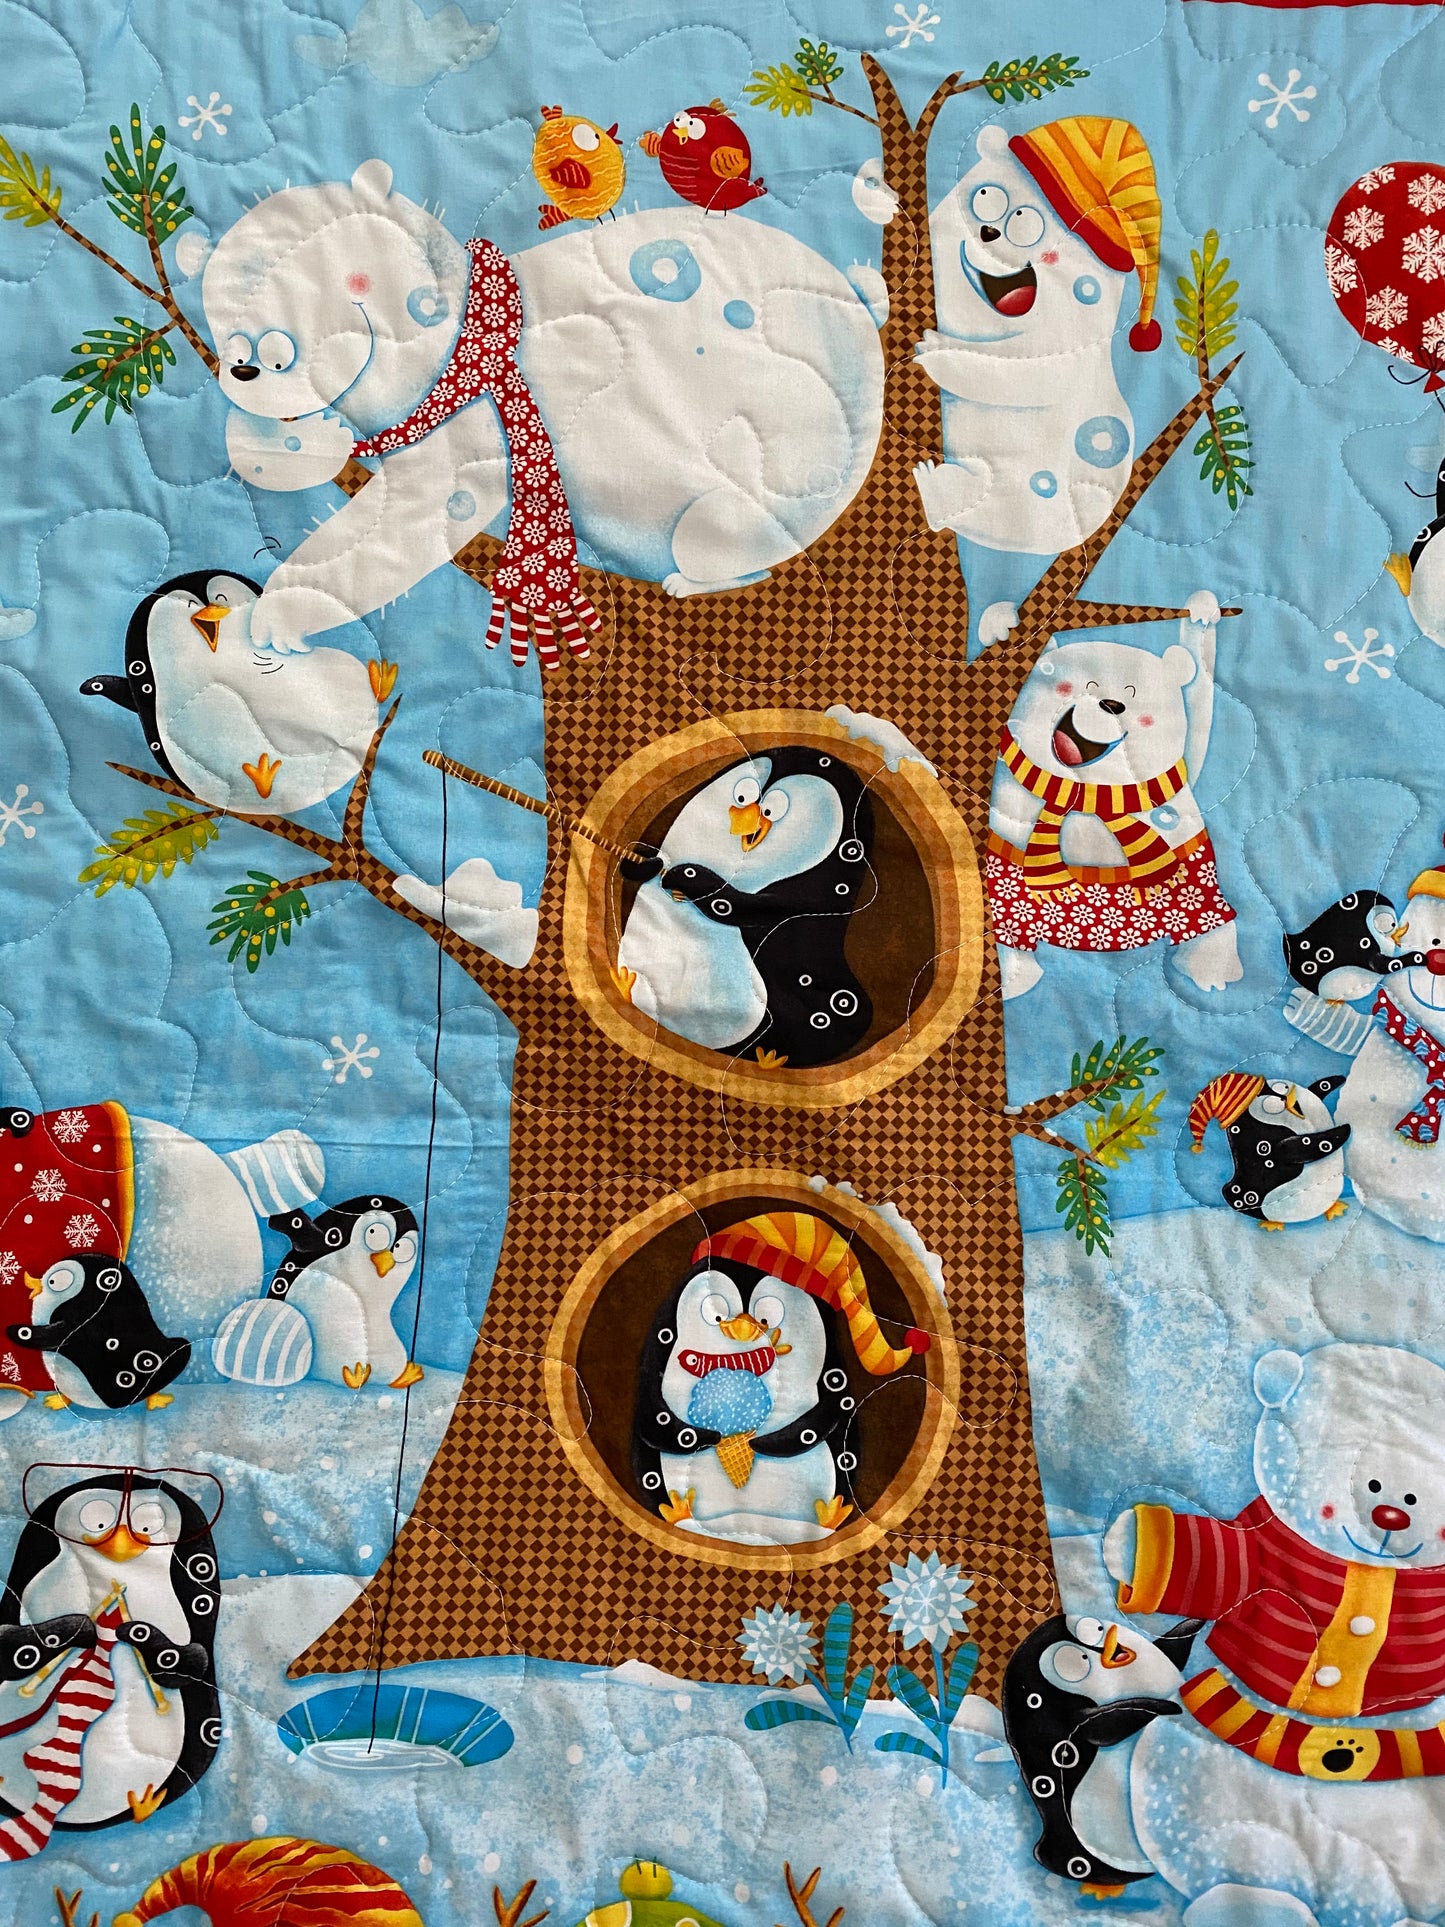 Winter Nature Snow Fun Baby Child Quilted Blanket Polar Bear, Penguins, Snowman Snowflakes Baby Nursery Gender Neutral Bedding